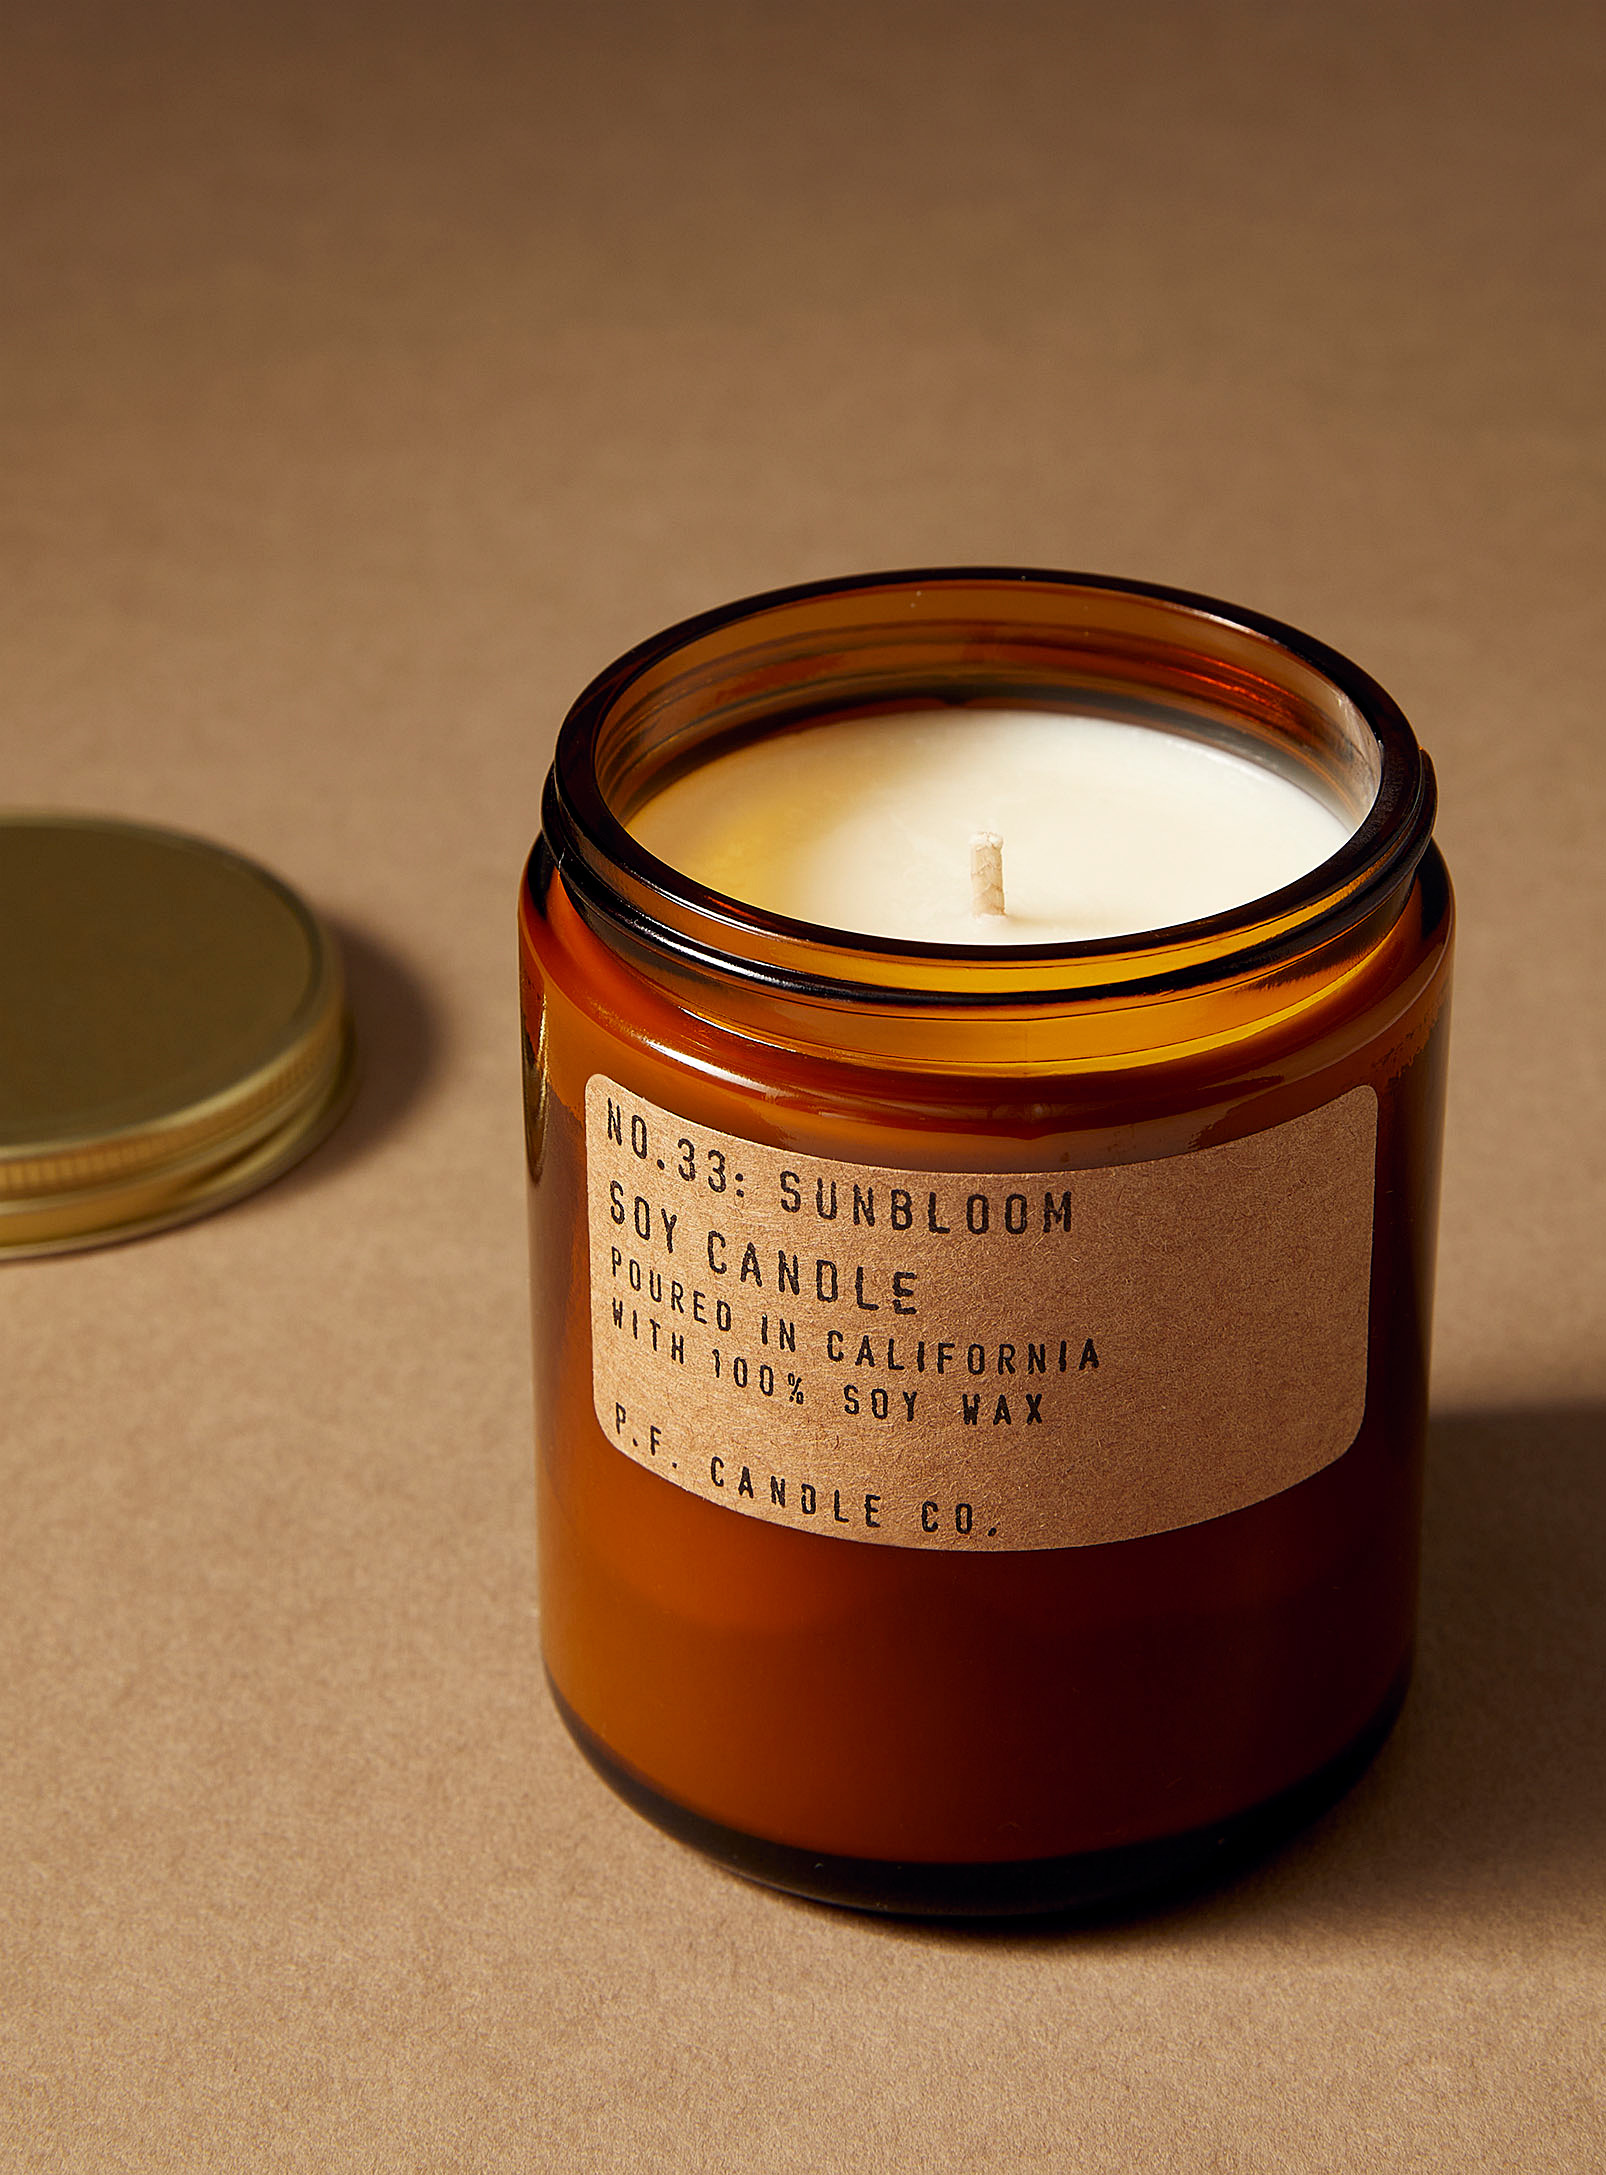 P.F. Candle Co. - Sunbloom scented candle